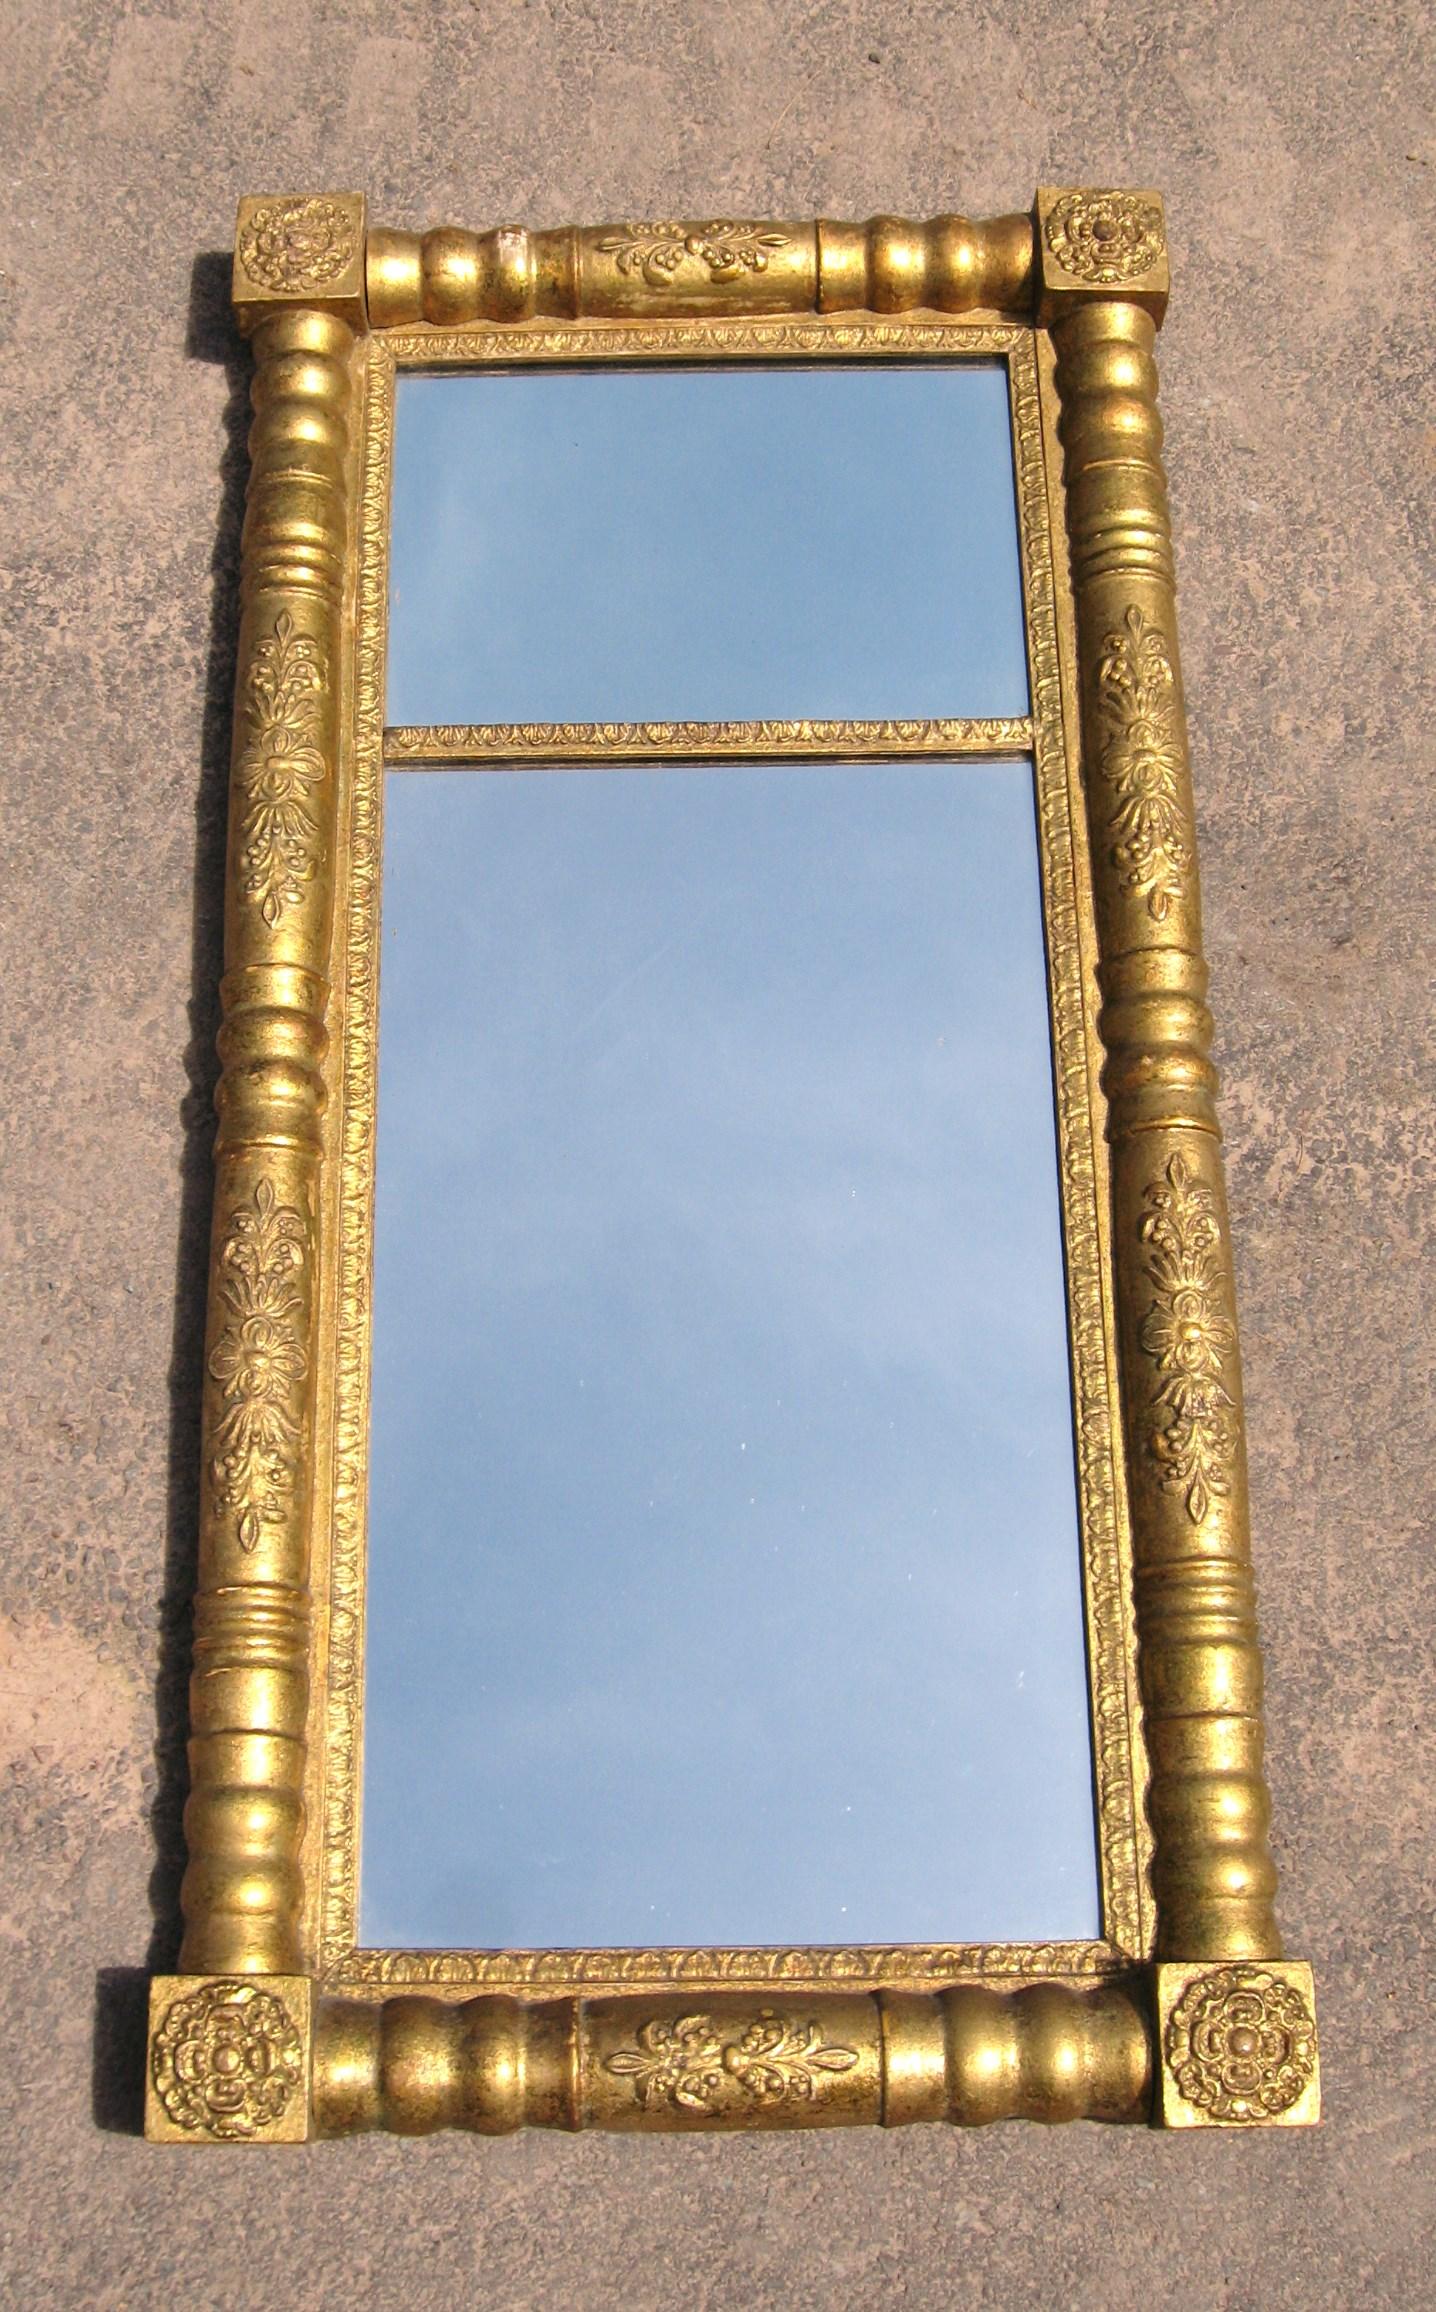 Wonderful two section neoclassical gold leaf gilt mirror, it retains the original mirror and gold gilt. Measuring 22 inches wide x 43 3/8 inches High x 2 3/4 inches deep, section sizes are 14 in wide x 9 5/8 in high -14 1/2 in wide 25 5/8 in high,